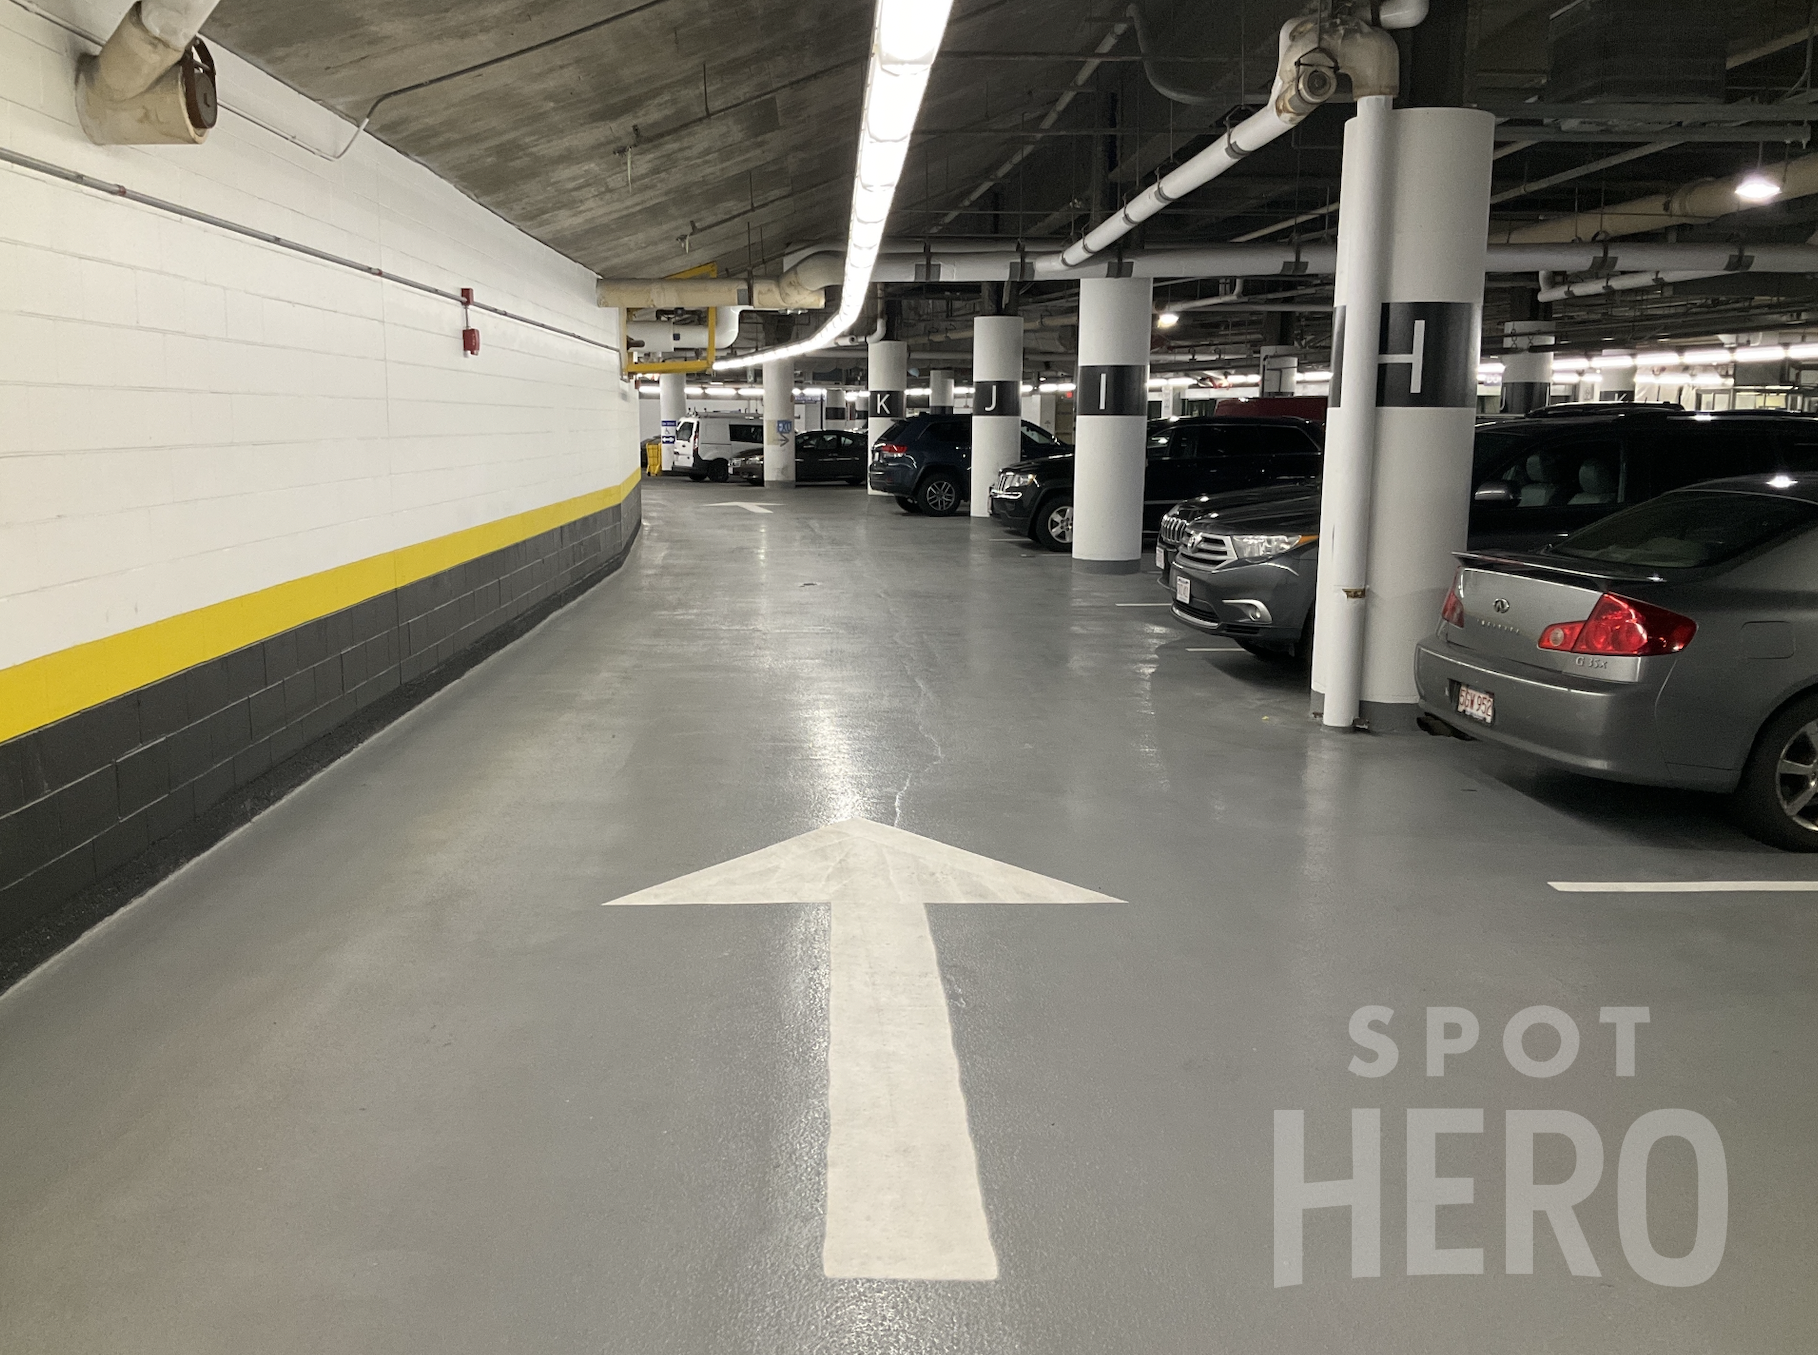 Copley Place Parking  Book now on SpotHero and save